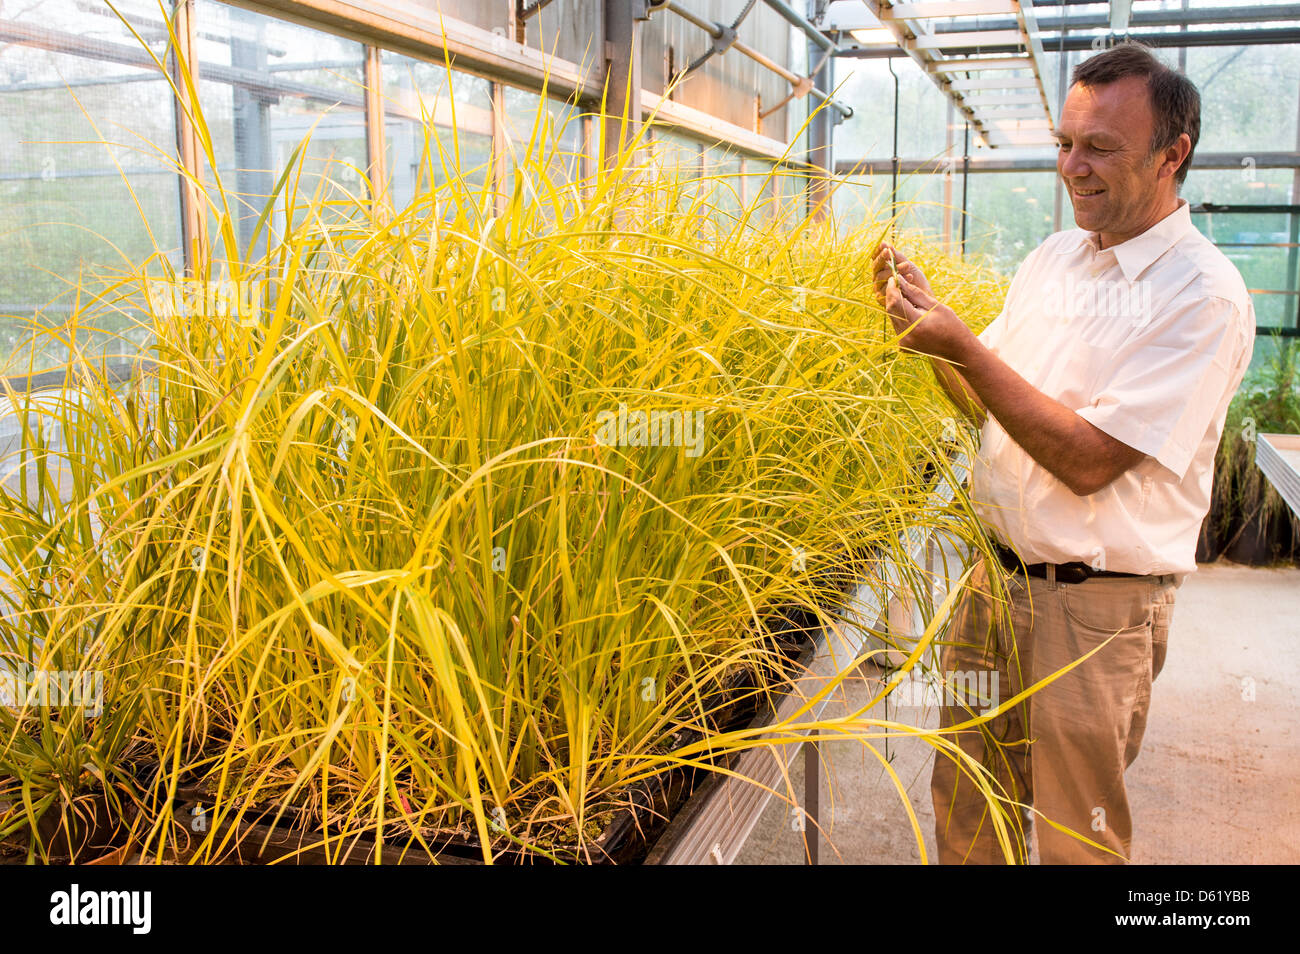 Biologist Peter Poschlod examines Scirpus radicans, a plant in danger of extinction, at the University in Regensburg, Germany, 27 April 2012. At the Gene bank Bavaria Ark rare seeds are stored and conserved. Photo: ARMIN WEIGEL Stock Photo